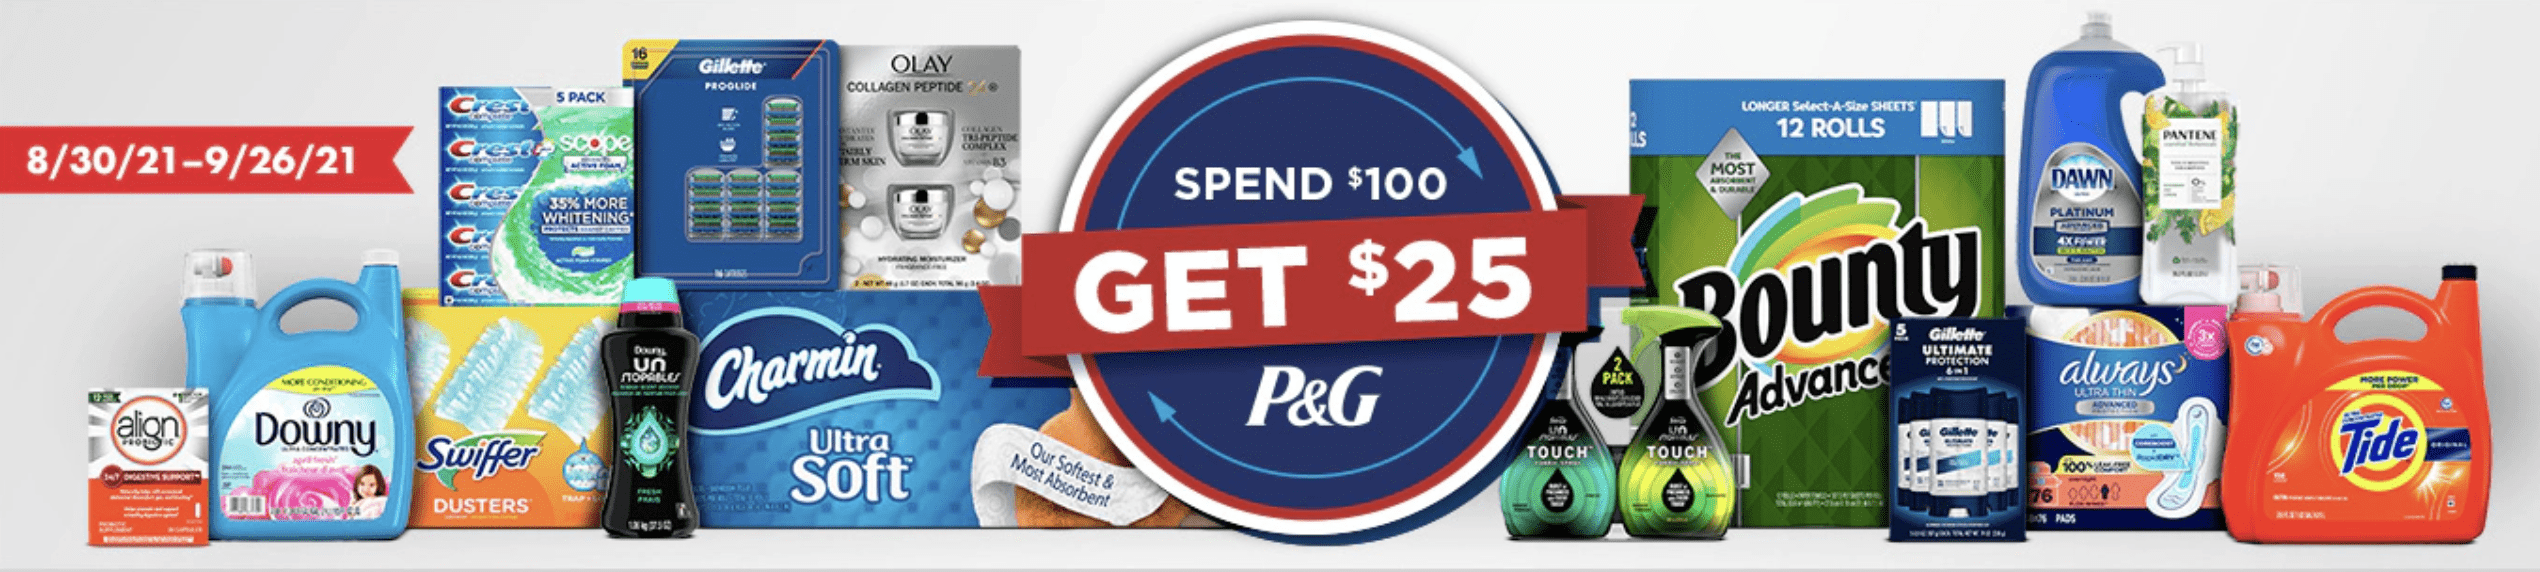 costco-p-g-rebate-promotion-buy-100-of-p-g-products-and-get-a-25-costco-shop-card-savings